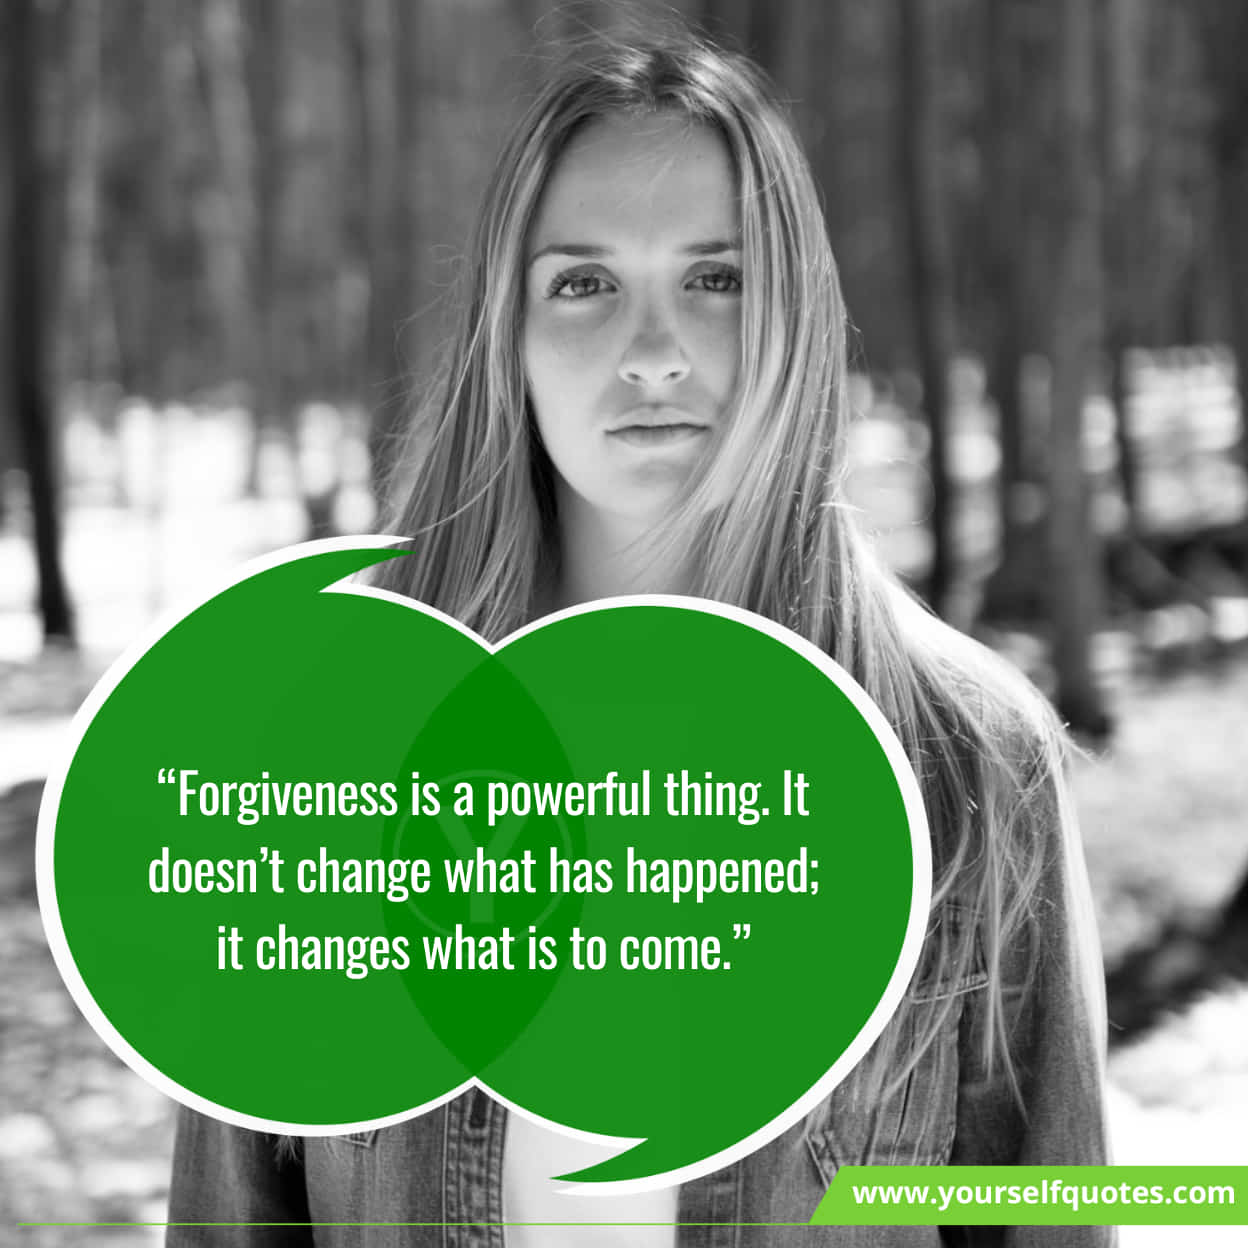 Latest Inspirational Quotes About Forgiveness 